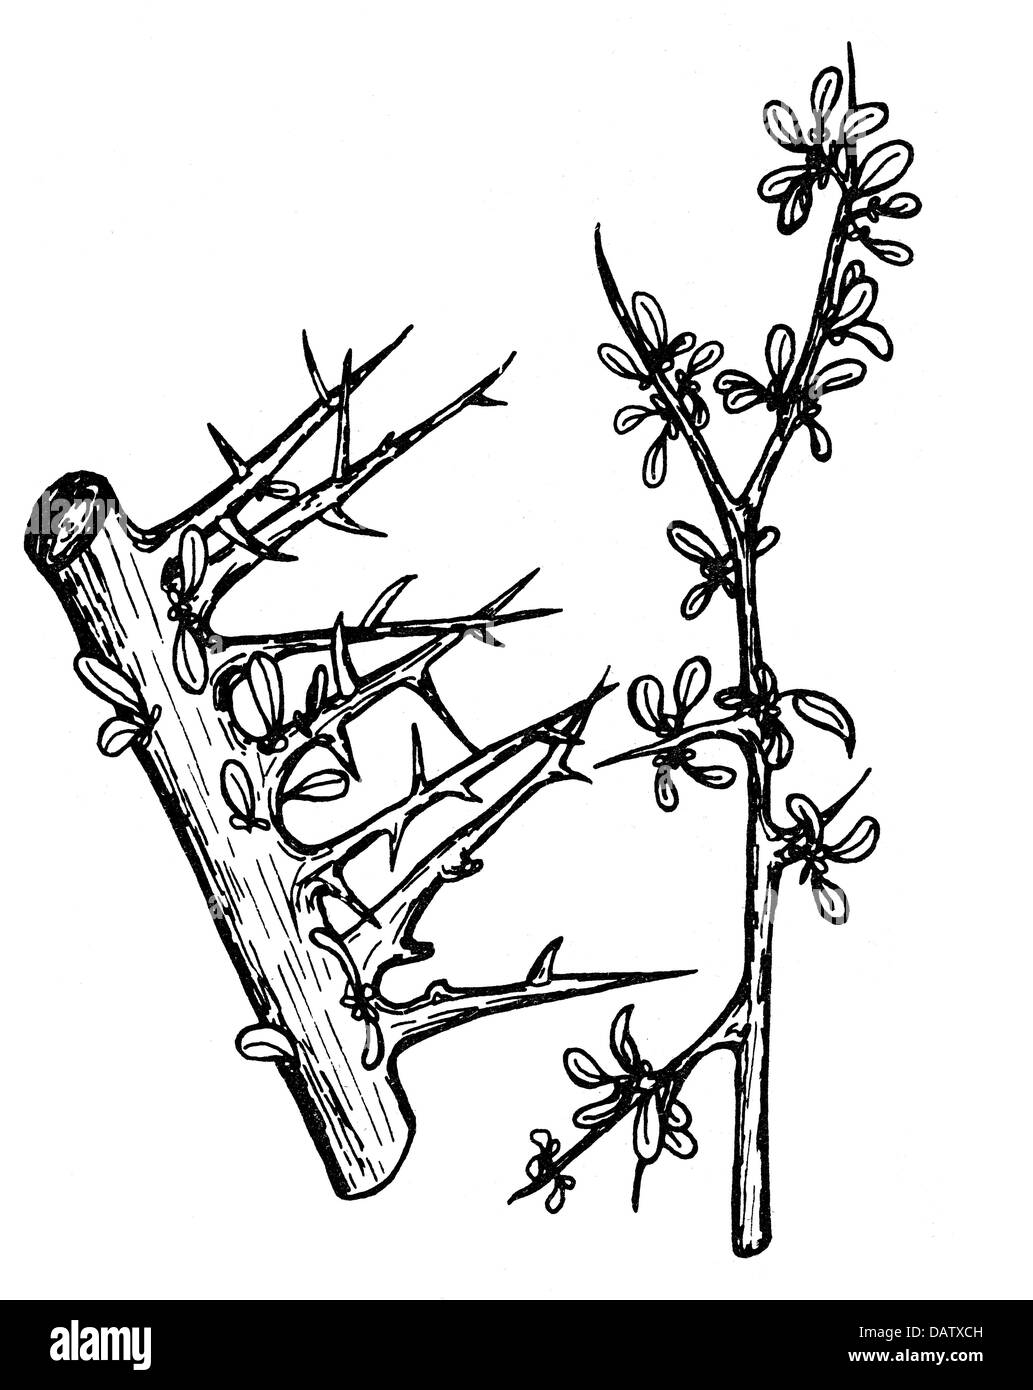 botany, myrrh (Commiphora myrrha), drawing, 1930s, Additional-Rights-Clearences-Not Available Stock Photo